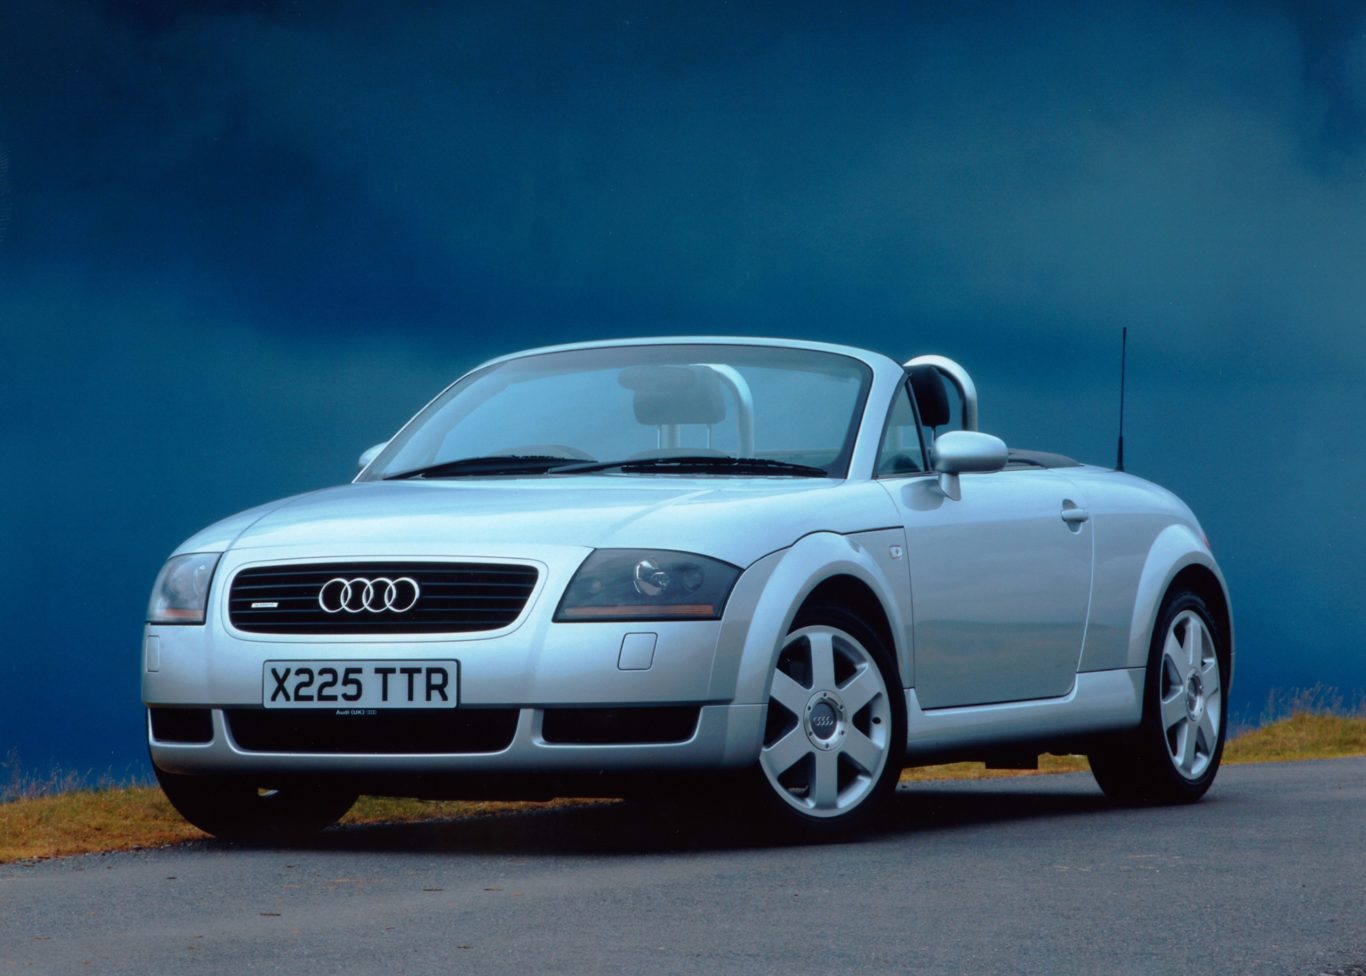 The Audi TT's styling looks fresh, even today